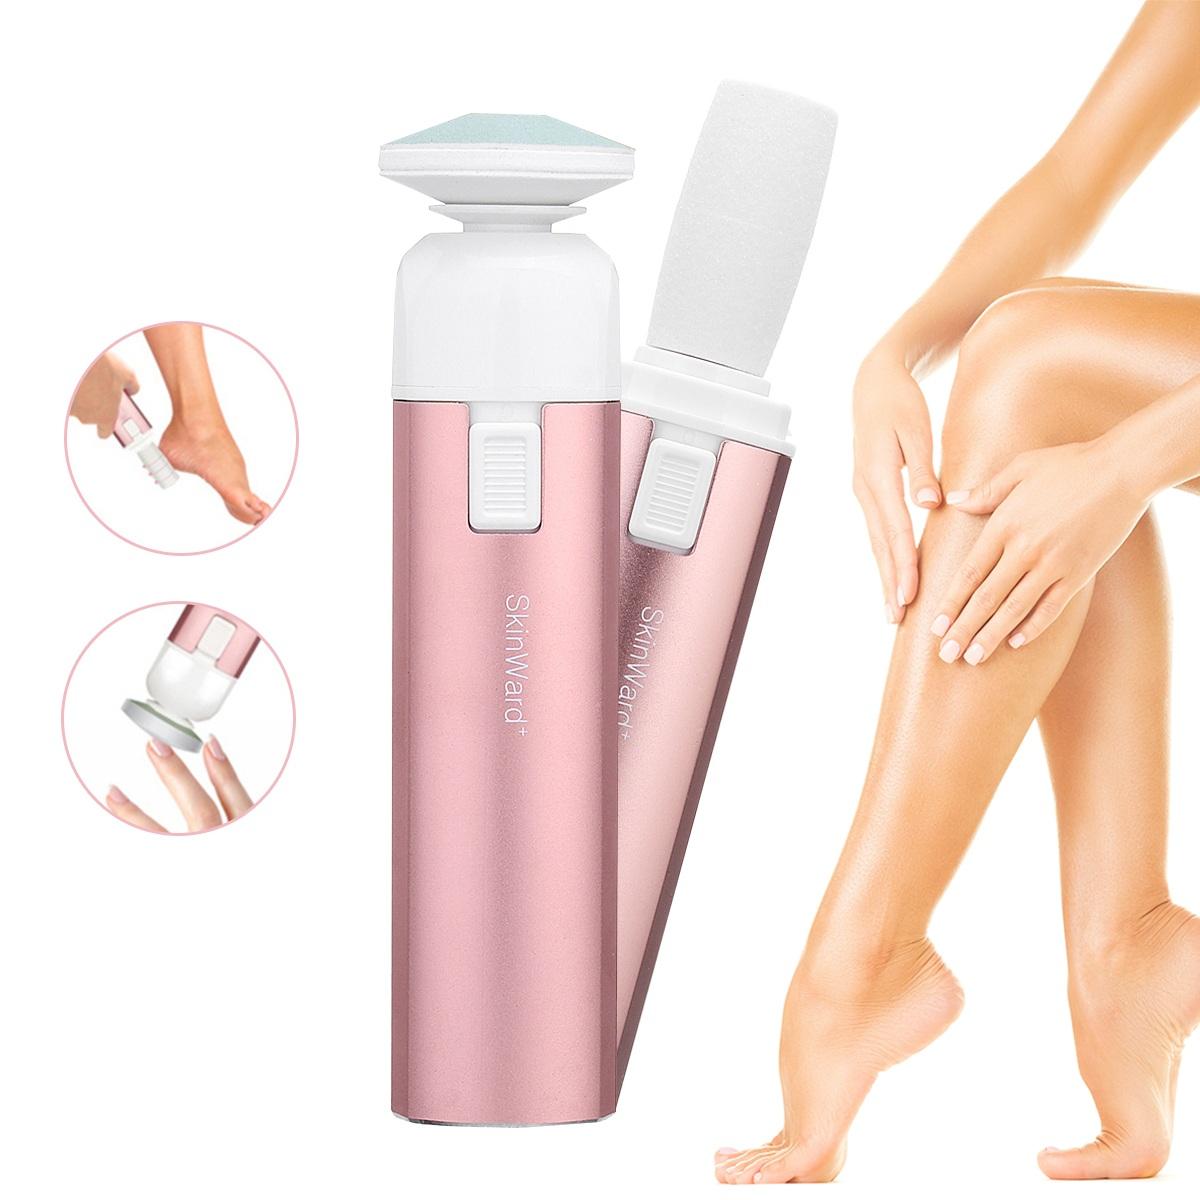 Skinward Electric Foot Grinder Foot Callus Remover for Dry Cracked Dead Skin Nail Drill Machine